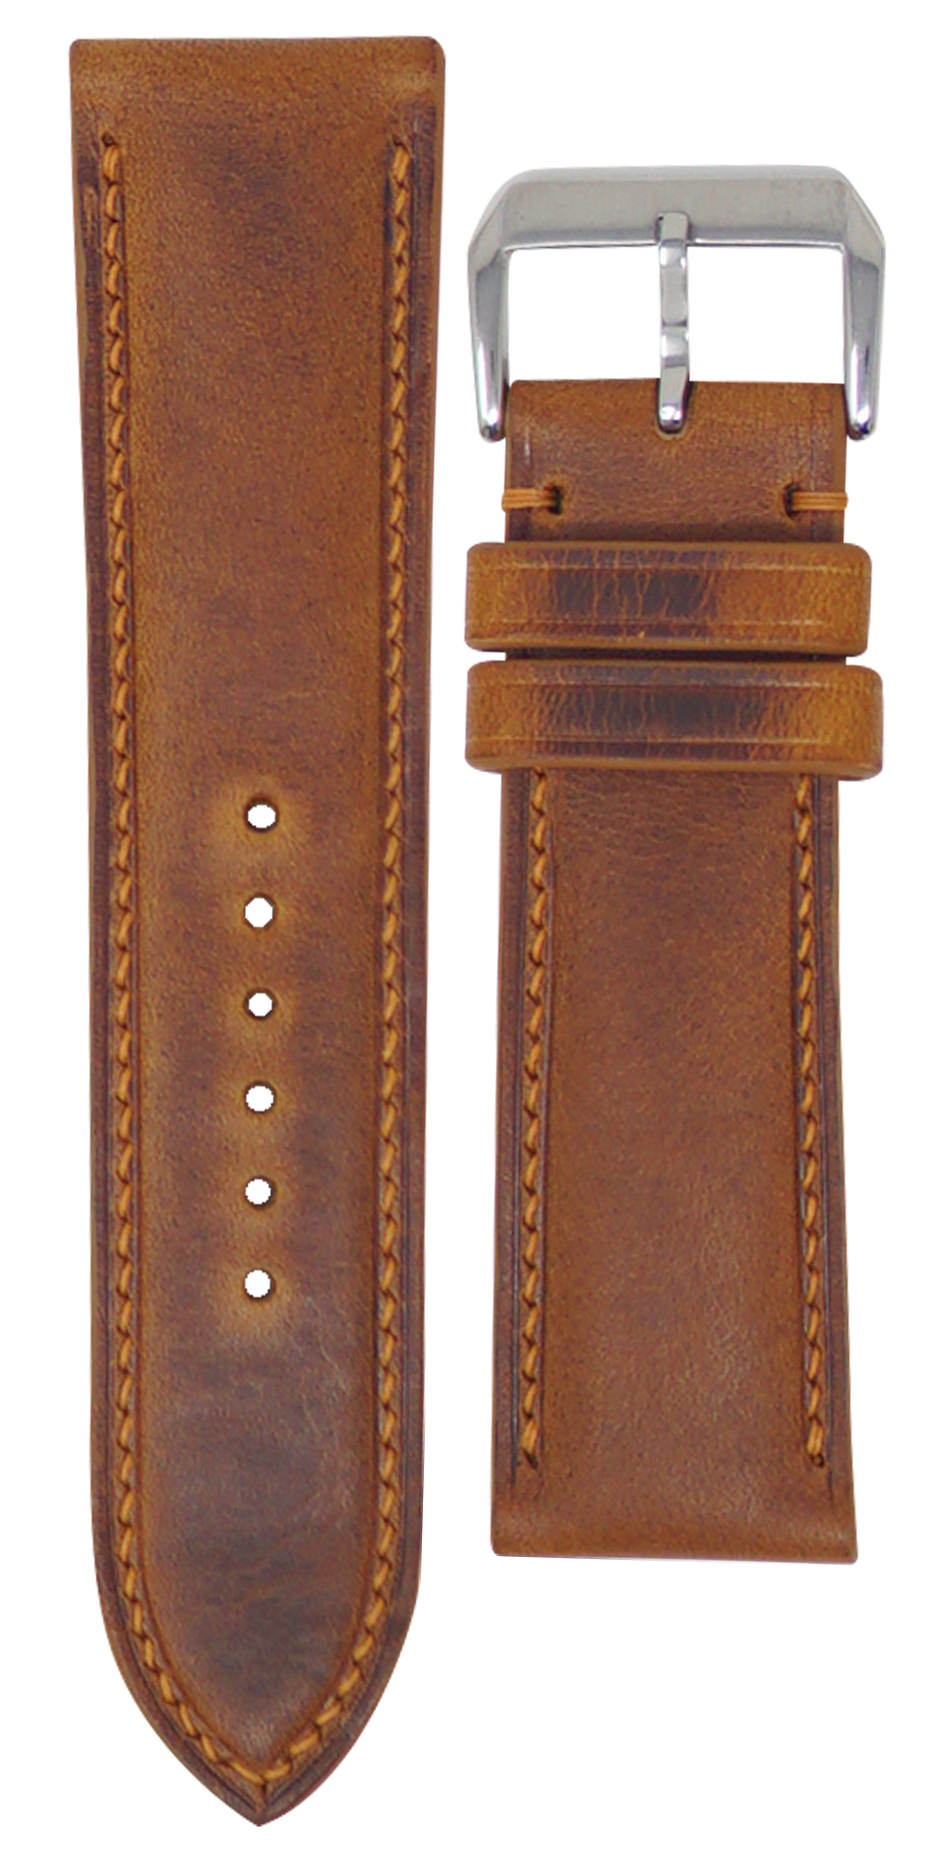 24mm watch strap - quick release